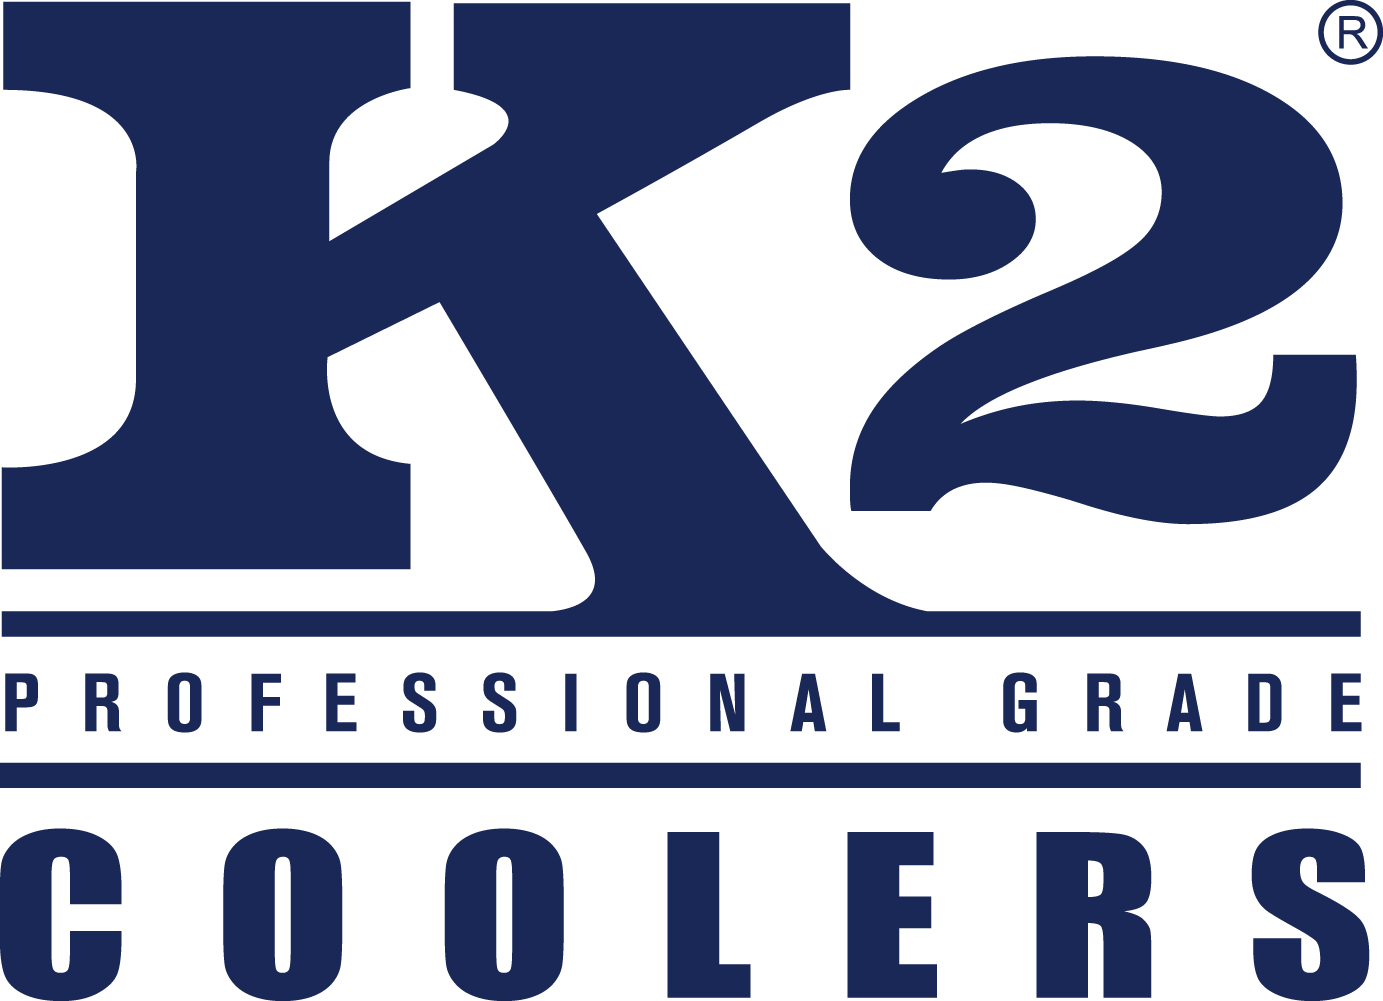 K2-coolers-logo250px